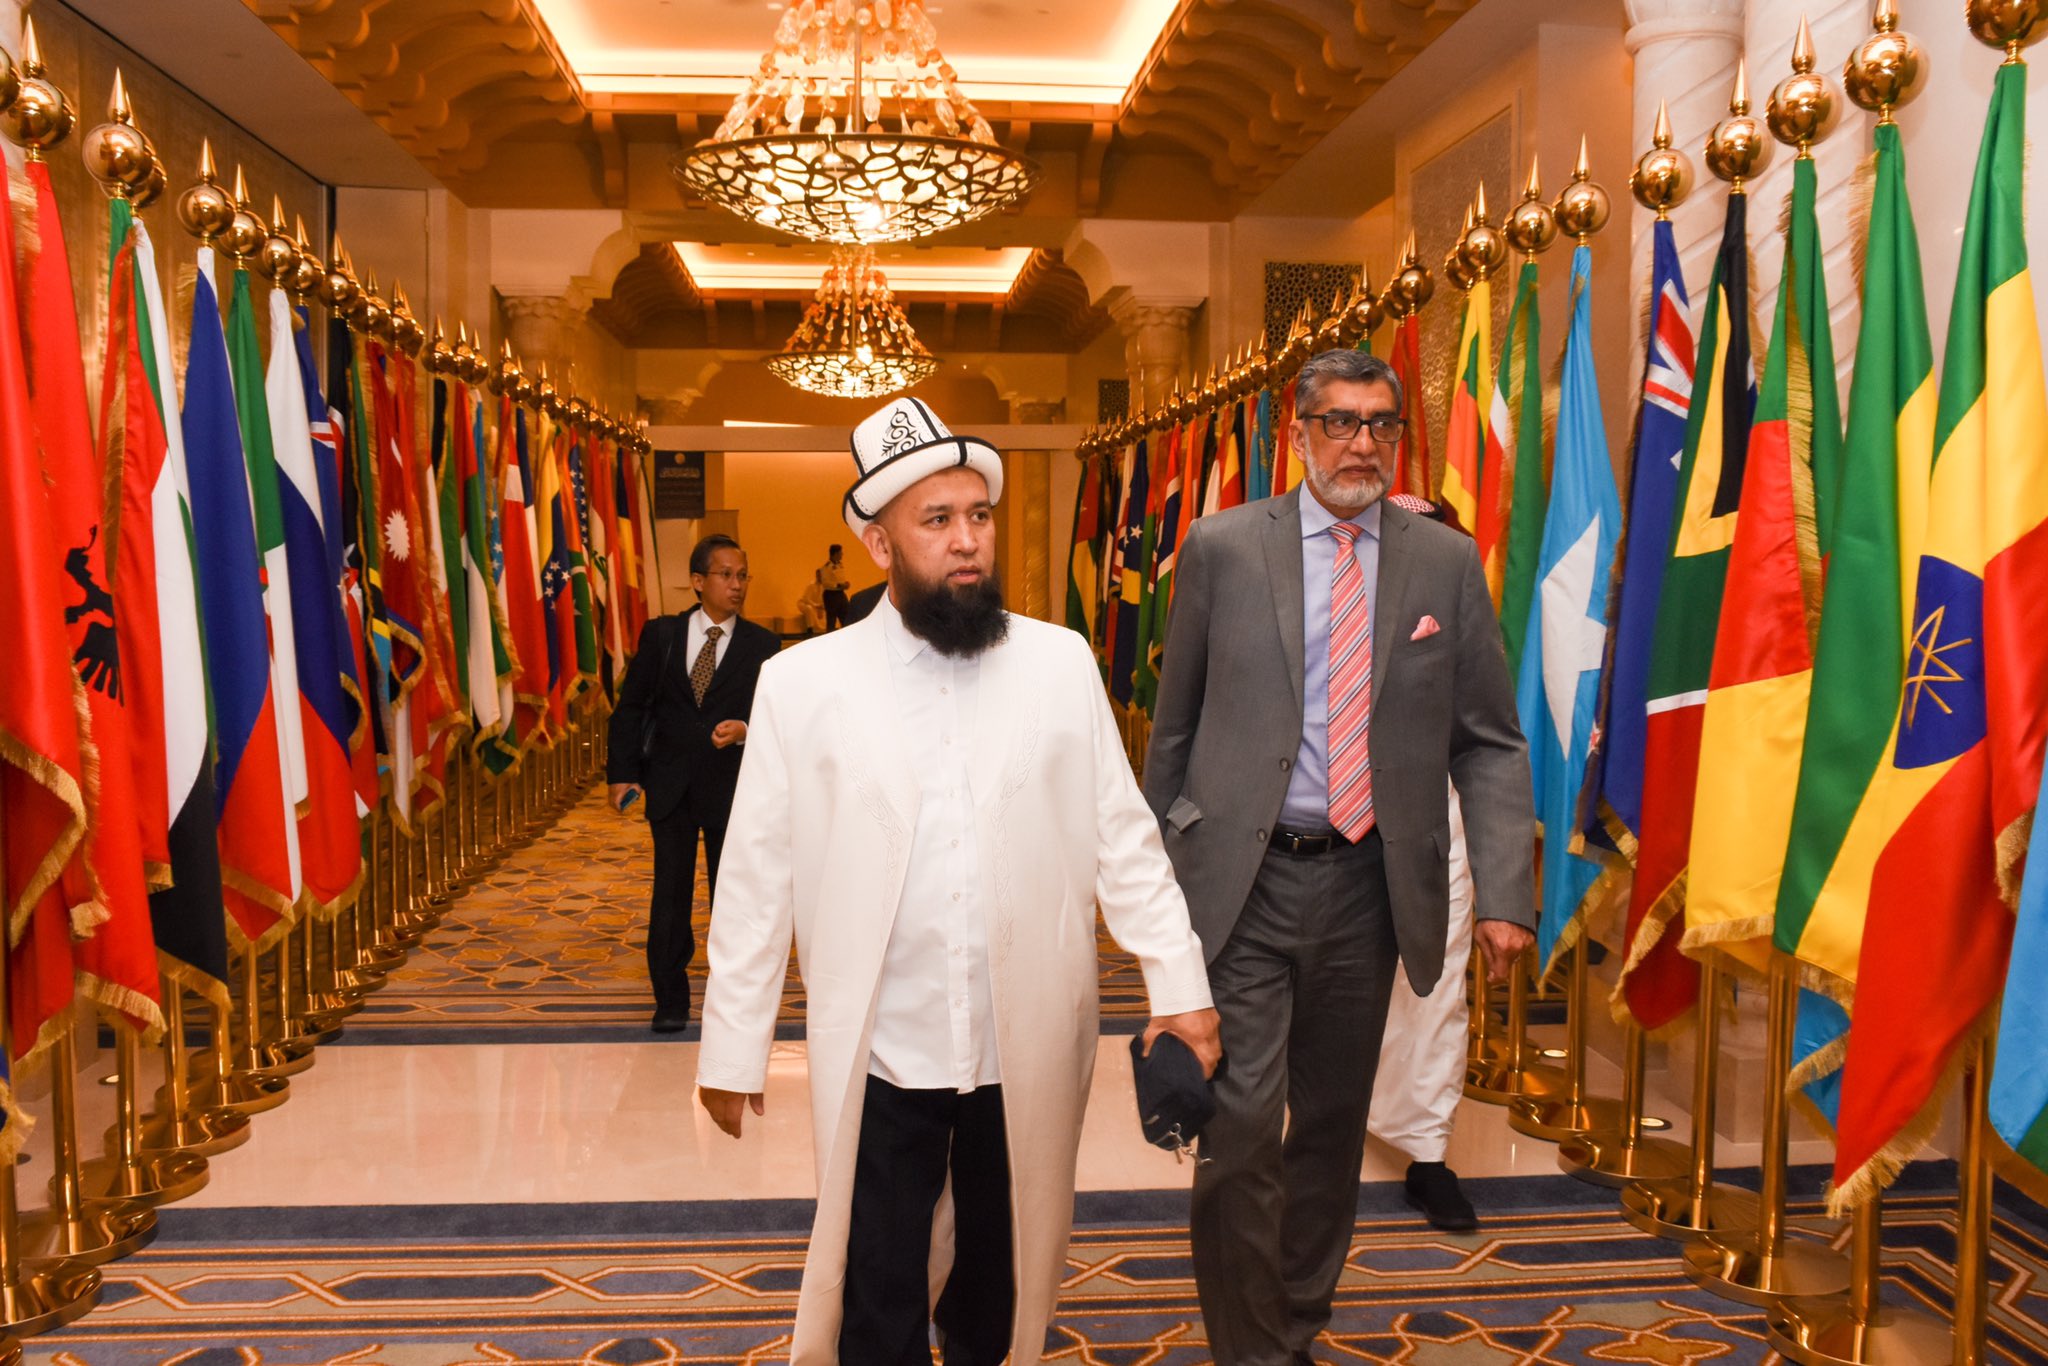 Muslim World League On Twitter He Dr Mohammadalissa Joins Muslim Scholars From Around The